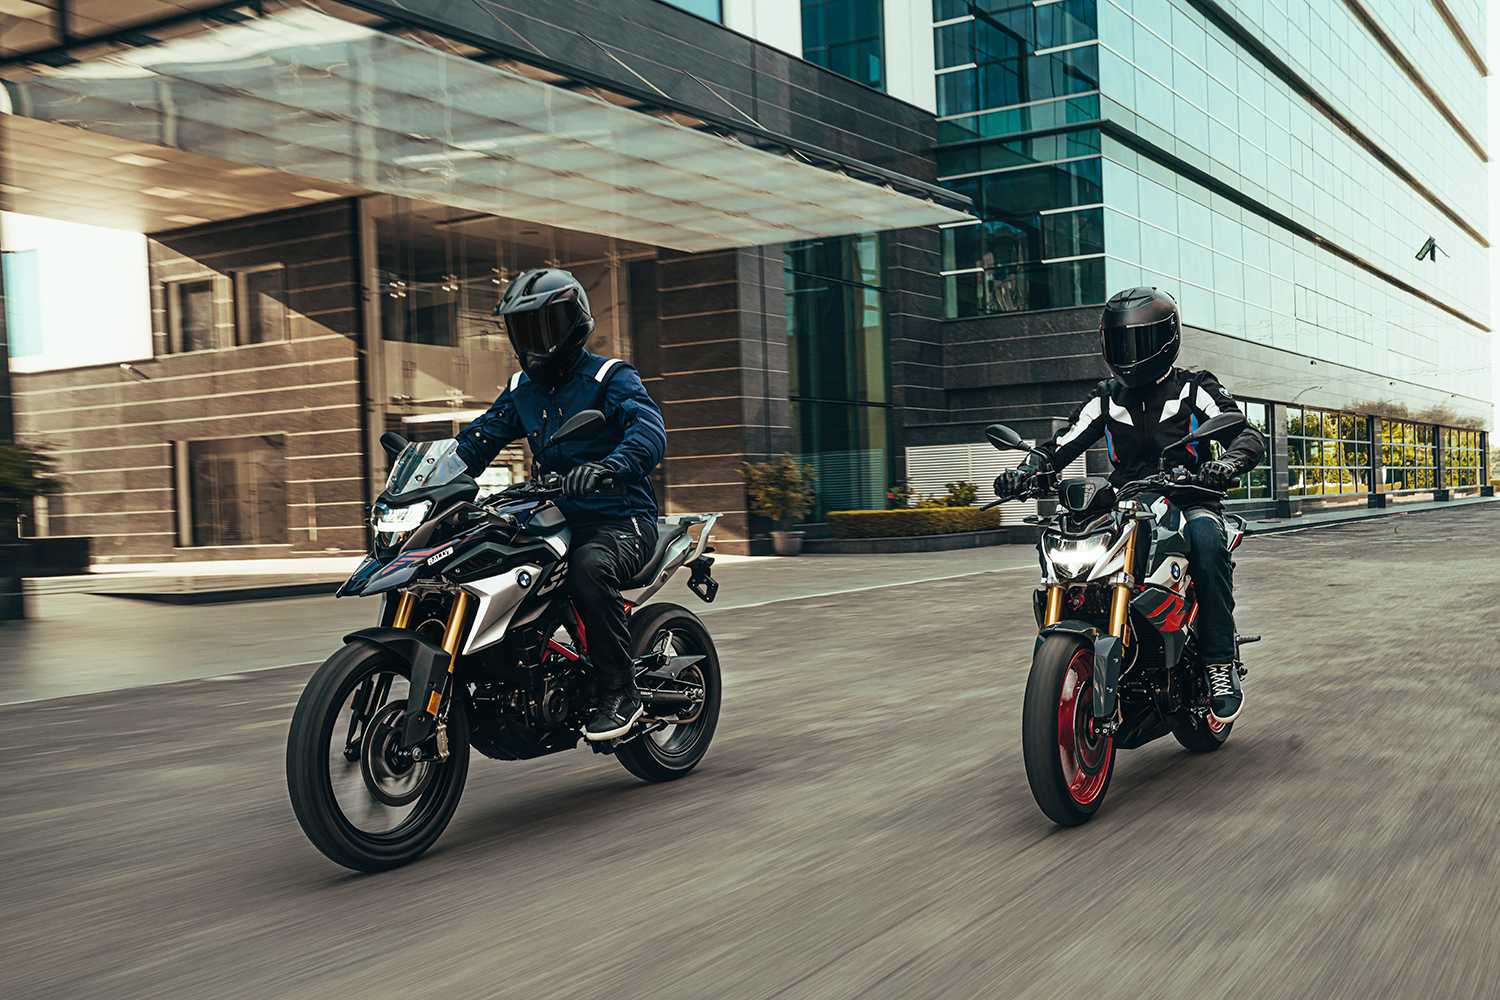 Redesigned Refreshed Re Energized The Bmw G 310 R And Bmw G 310 Gs Launched In A New Avatar